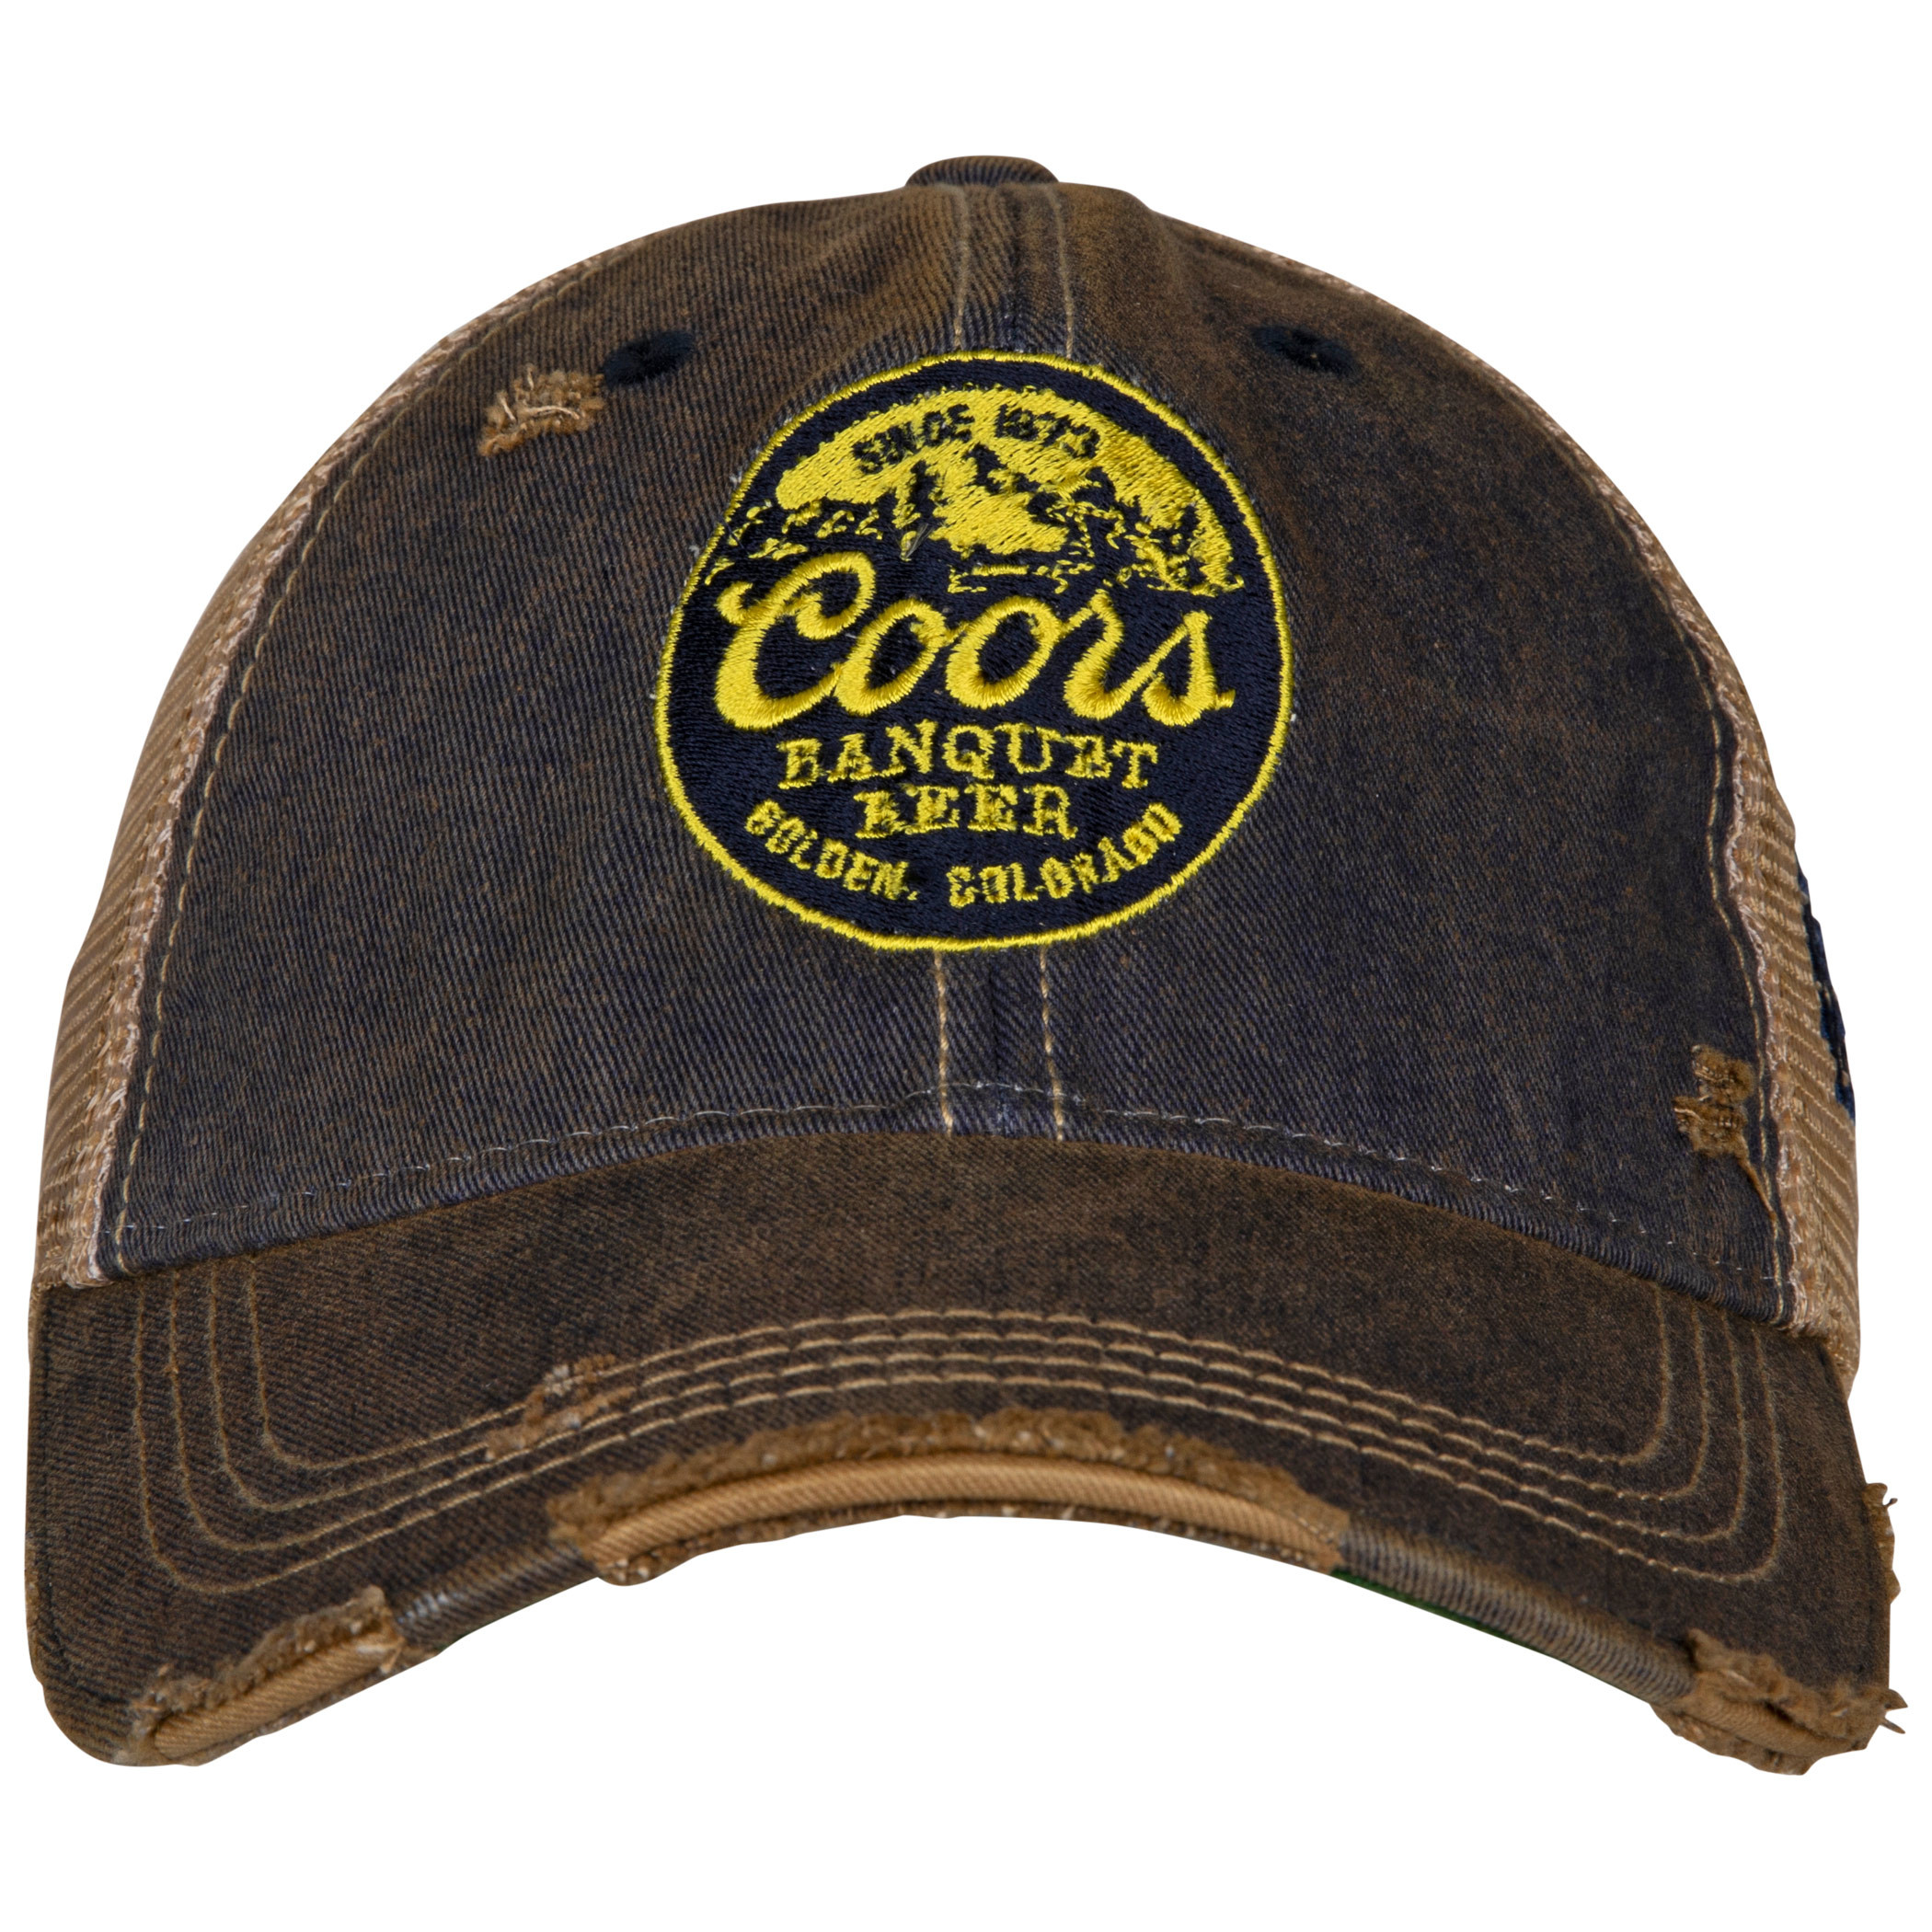 Coors Mountain Logo Patch Distressed Tea-Stained Adjustable Hat